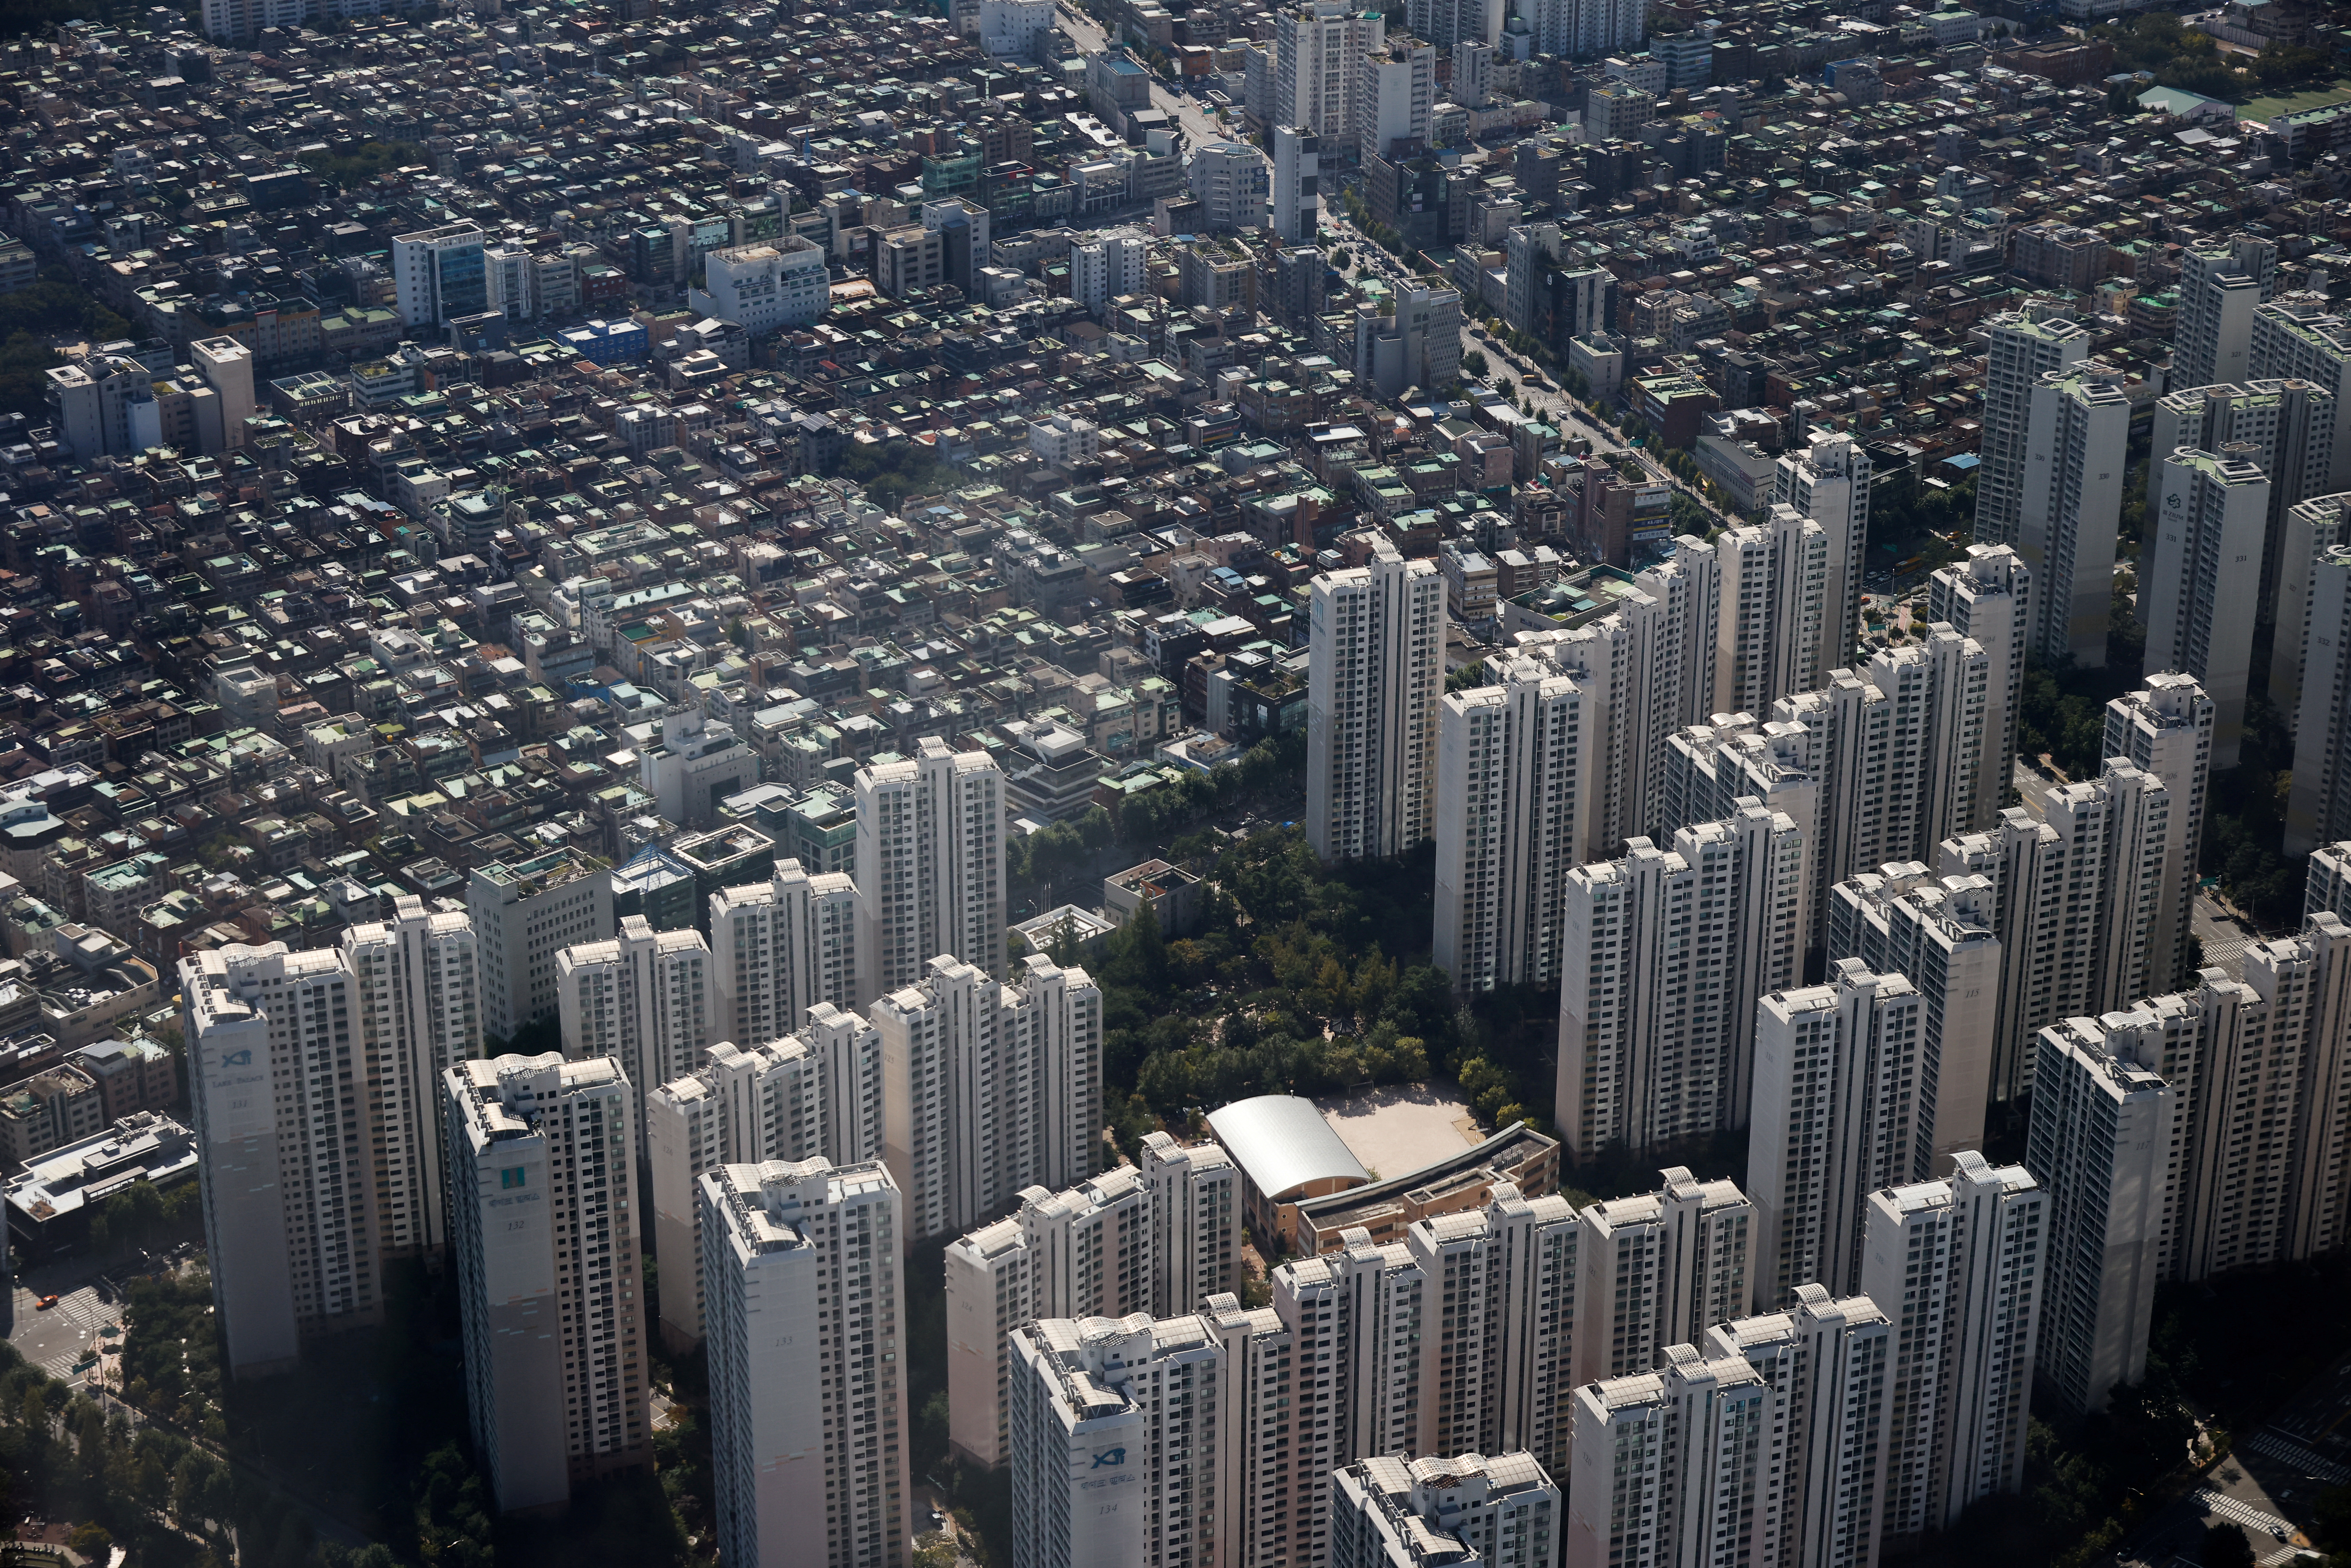 apartment complexes and residential area in Seoul